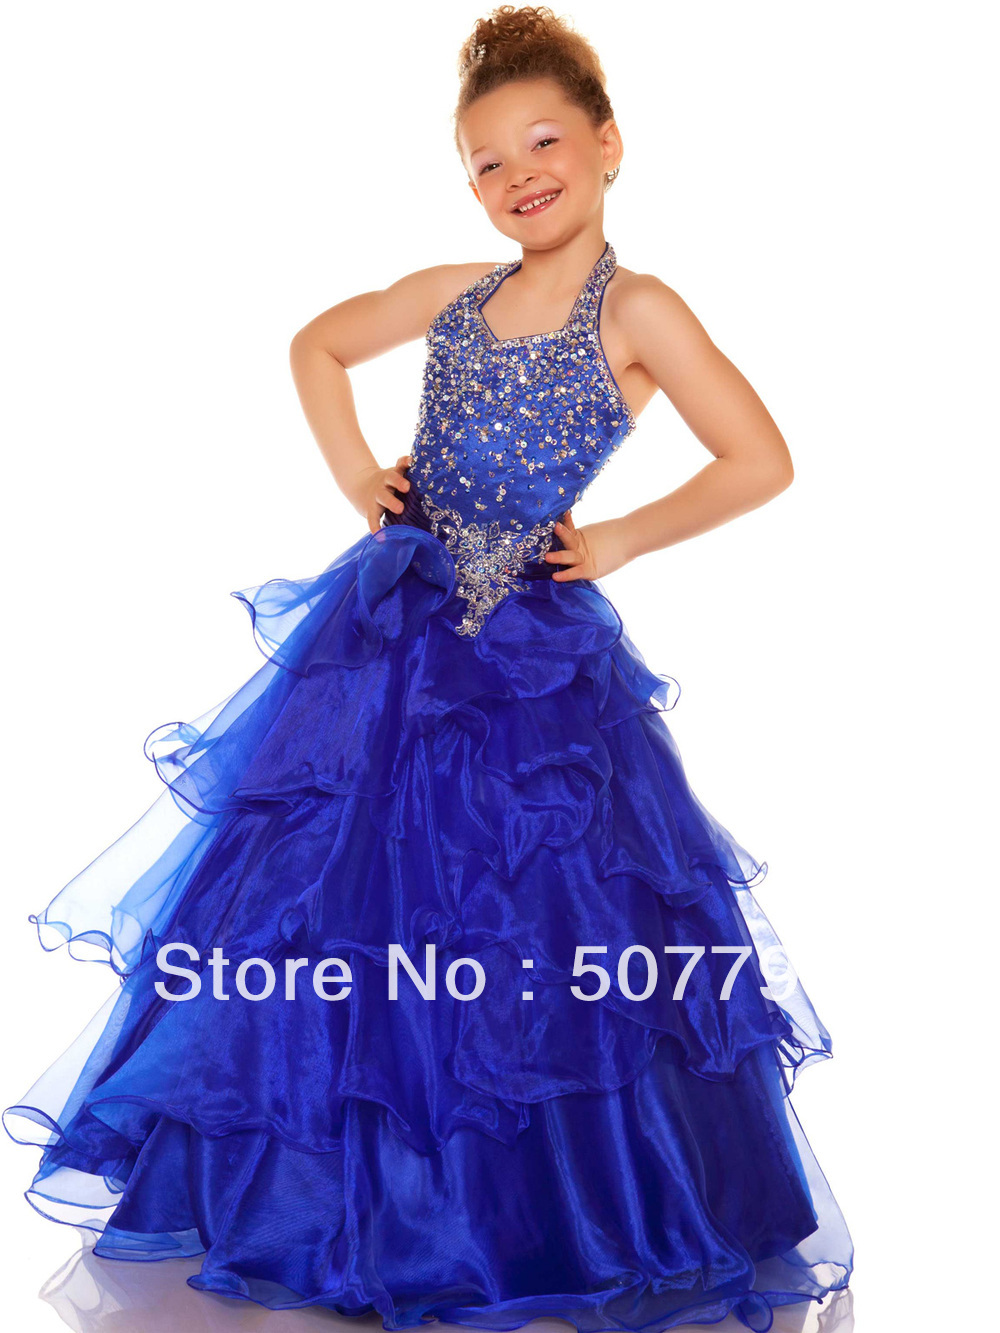 Free Shipping Custom Made 2013 Sequin Beaded Halter Appliques Lace Organza Flower Girl Dress,Floor Length,7-14T